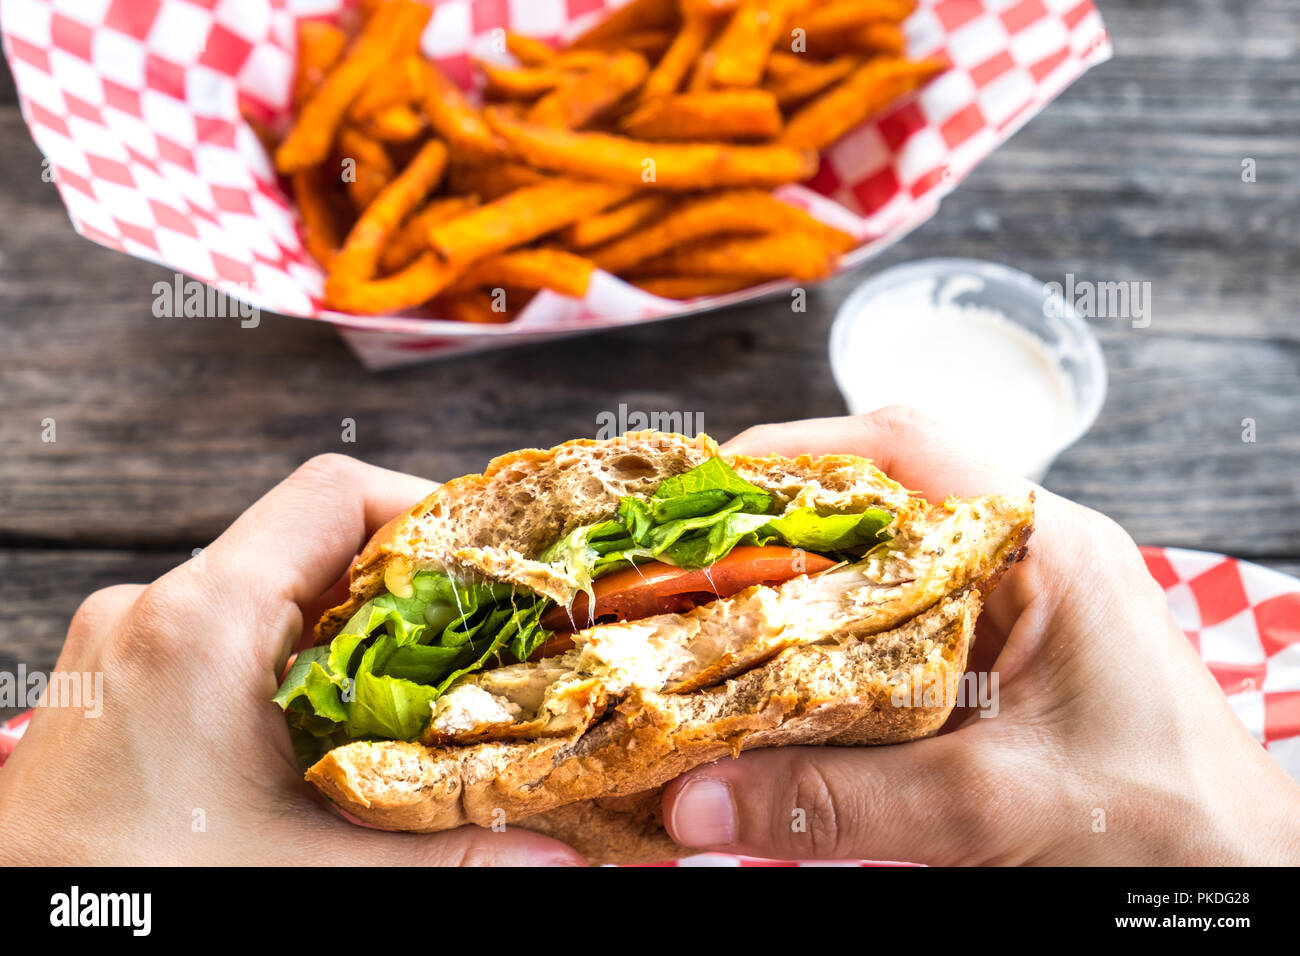 Woman hands hold burger style grilled chicken breast sandwich with lettuce and tomatoes and a side of sweet potato fries Stock Photo